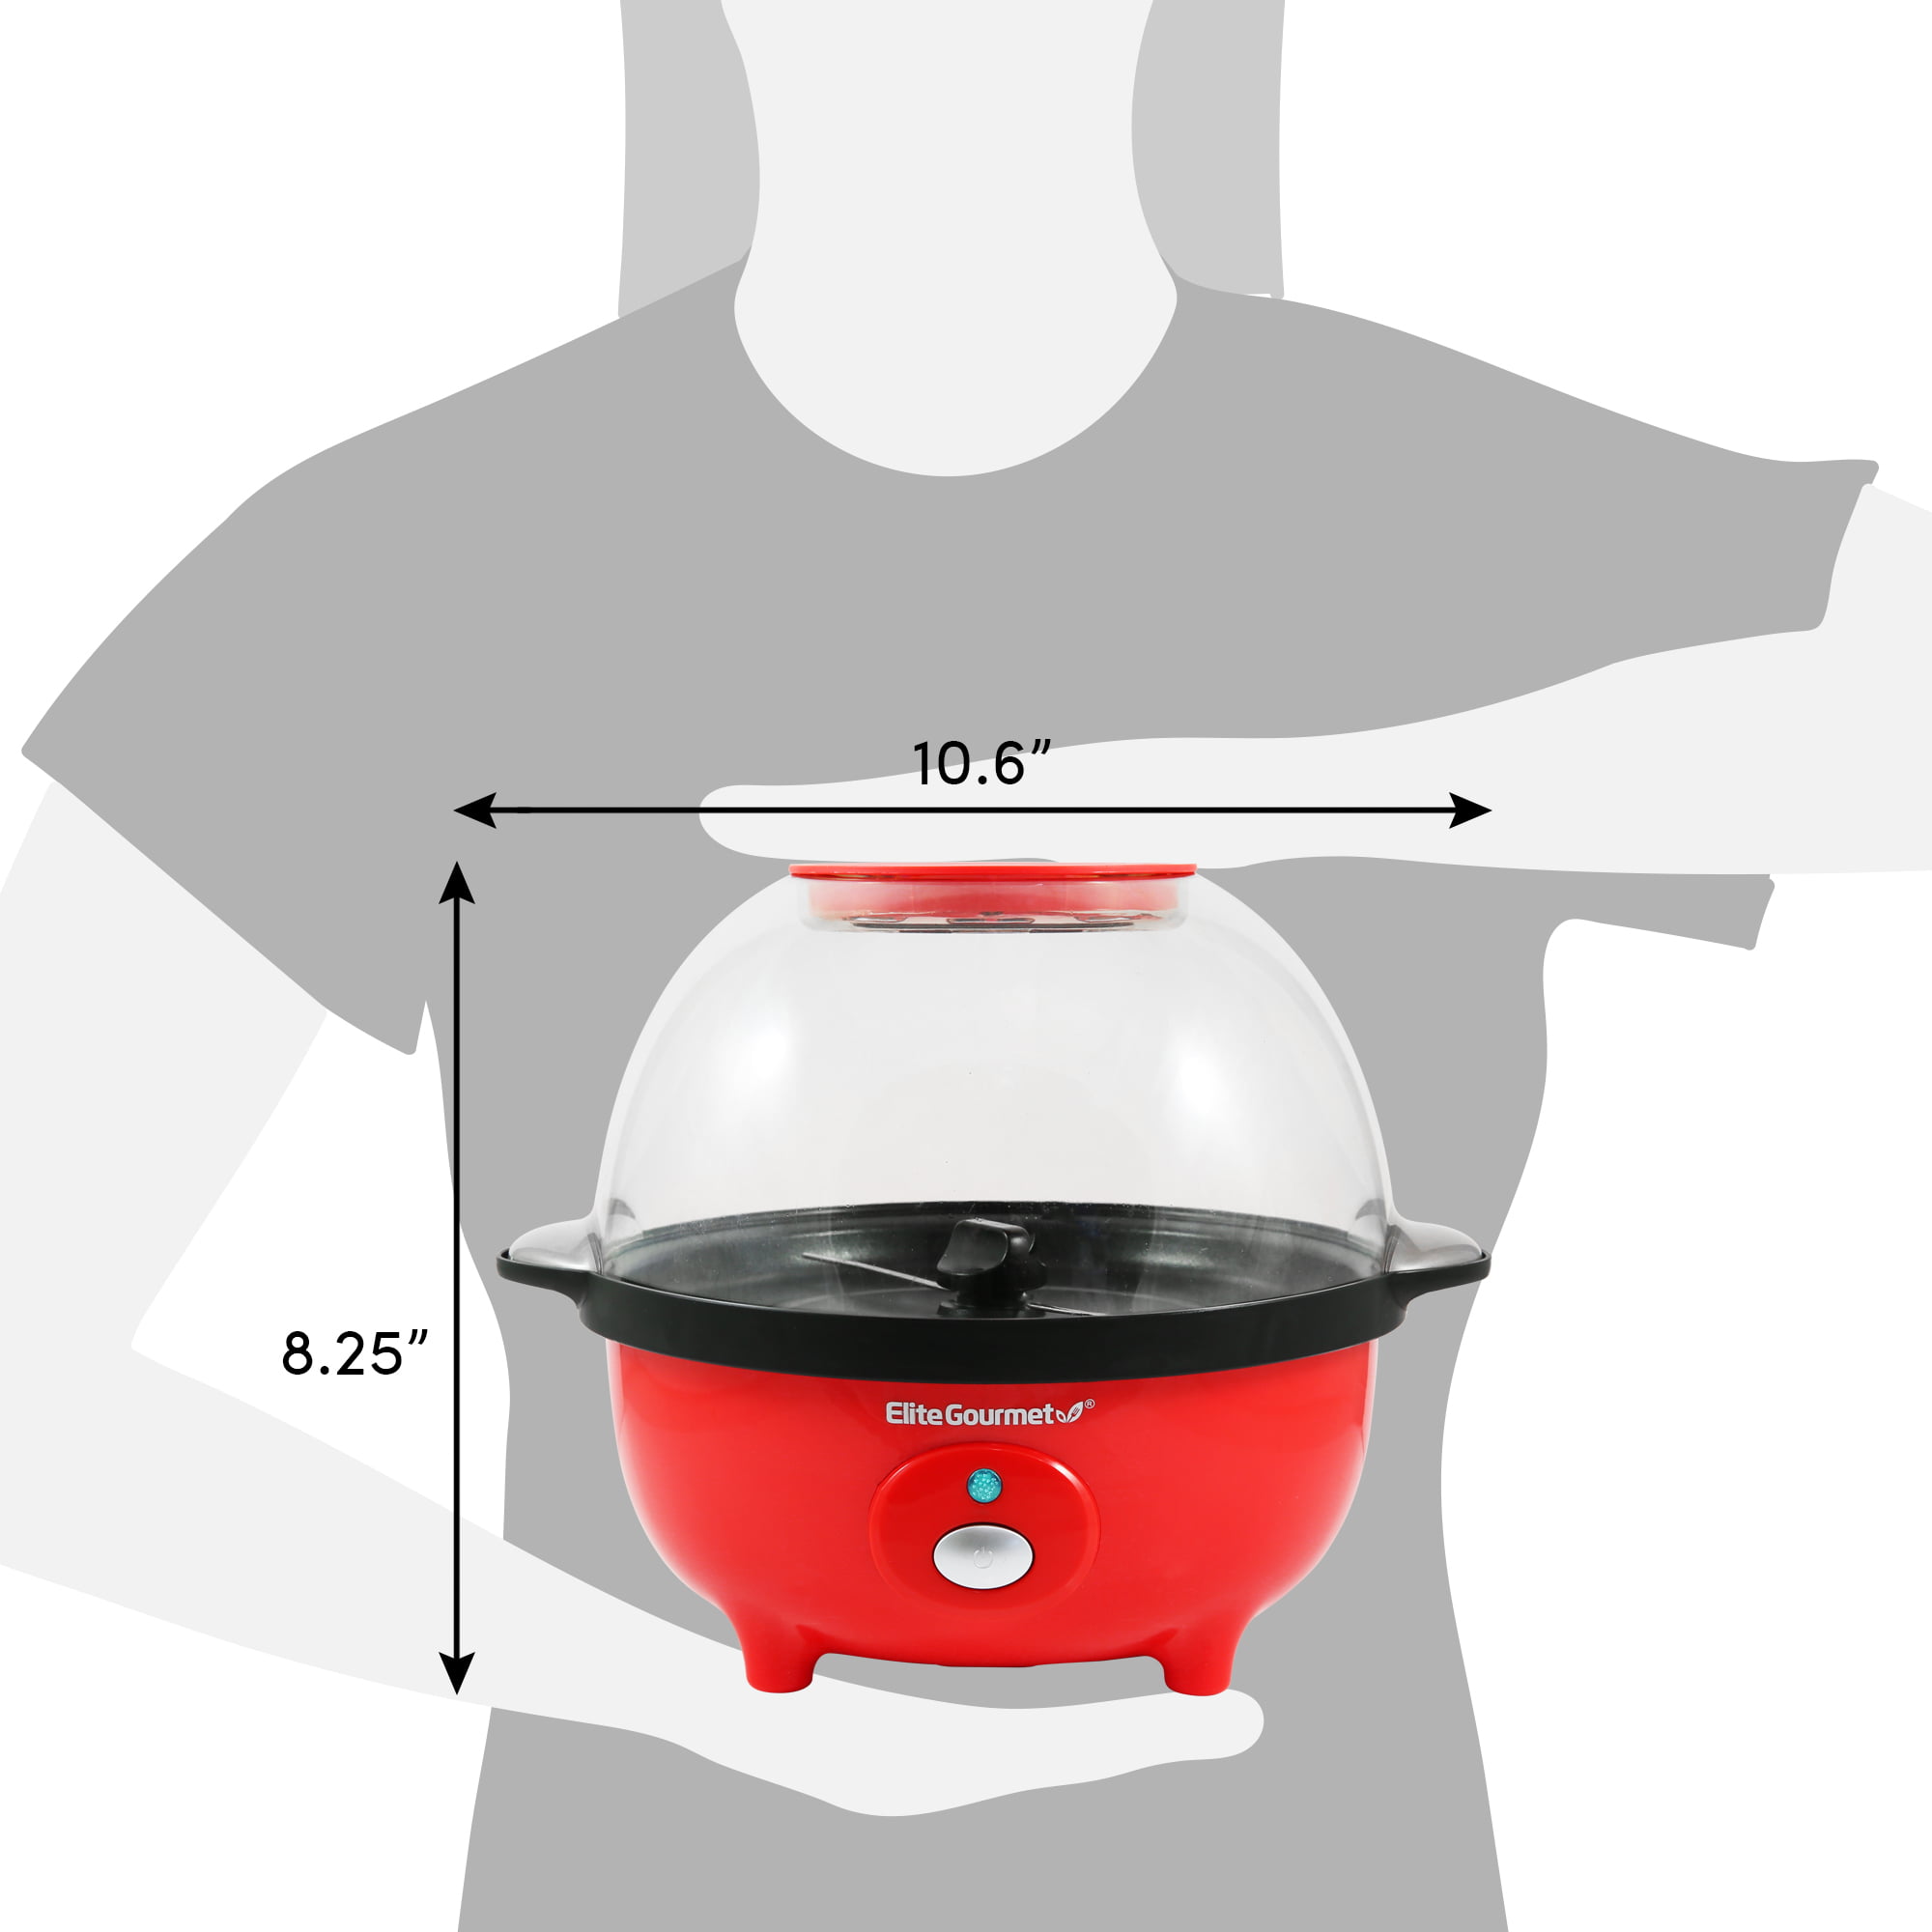  Elite Gourmet EPM330R Automatic Stirring 3Qt. Popcorn Maker  Popper, Hot Oil Popcorn Machine with Measuring Cap & Built-in Reversible  Serving Bowl, Great for Home Party Kids, Safety ETL Approved, Red: Home